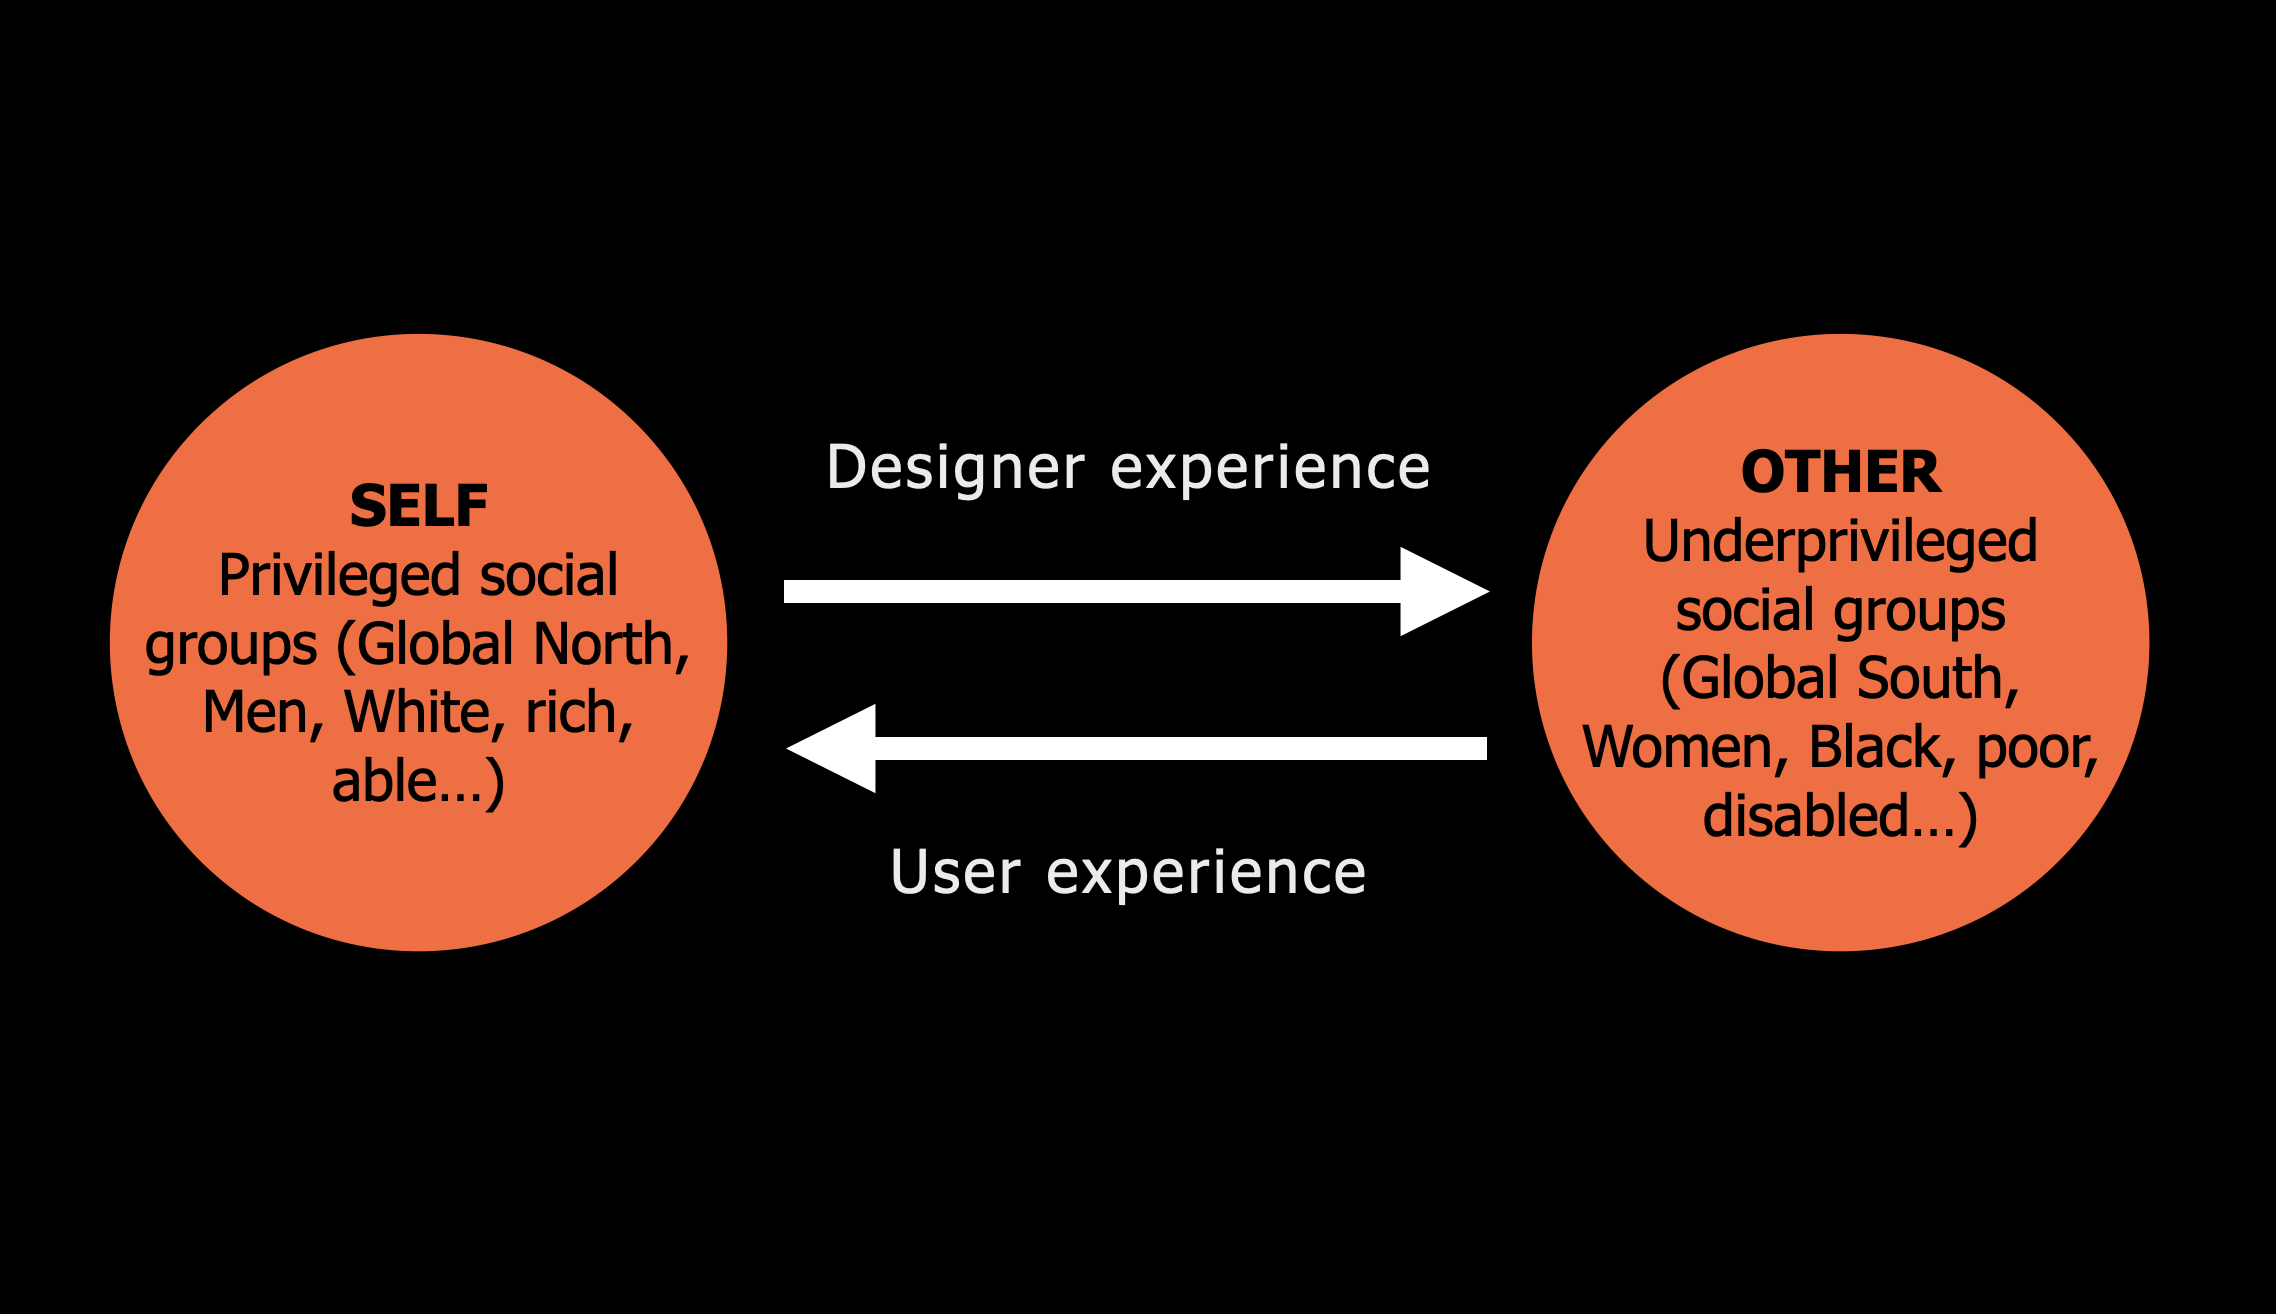 Ethics and aesthetics of the experience designed for the Other